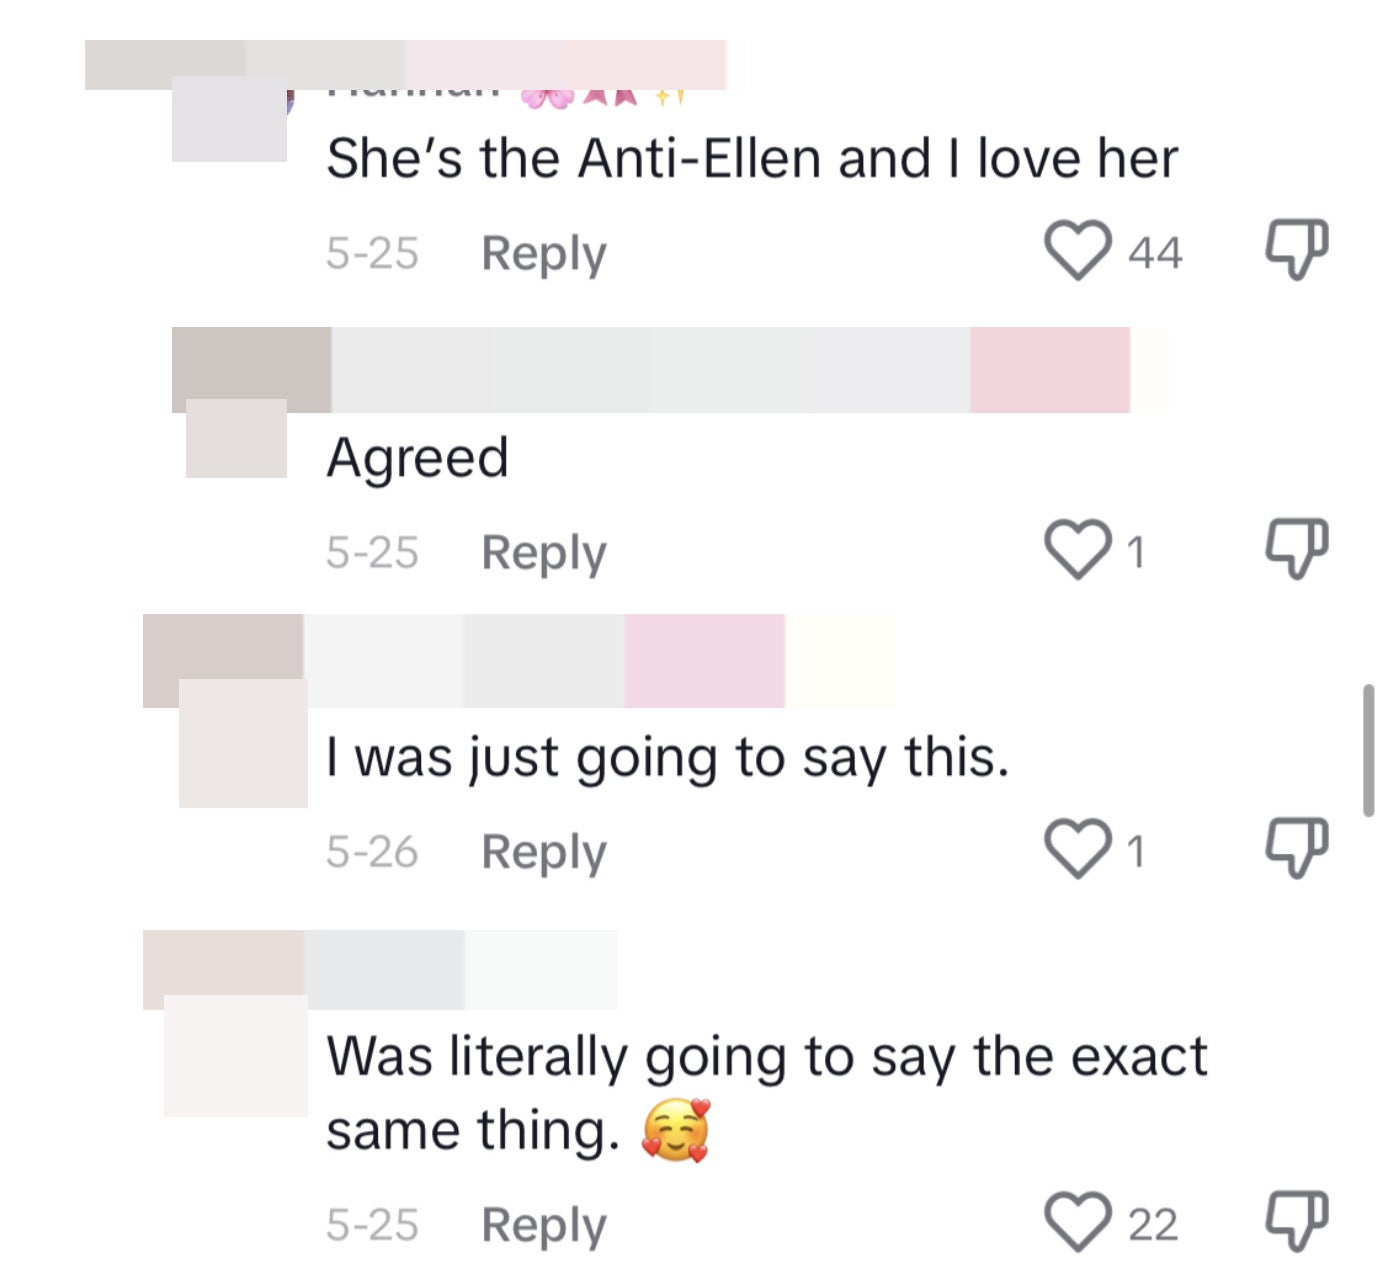 TikTok comments, including &quot;She&#x27;s the Anti-Ellen and I love her&quot; and &quot;Was literally going to say the exact same thing&quot;